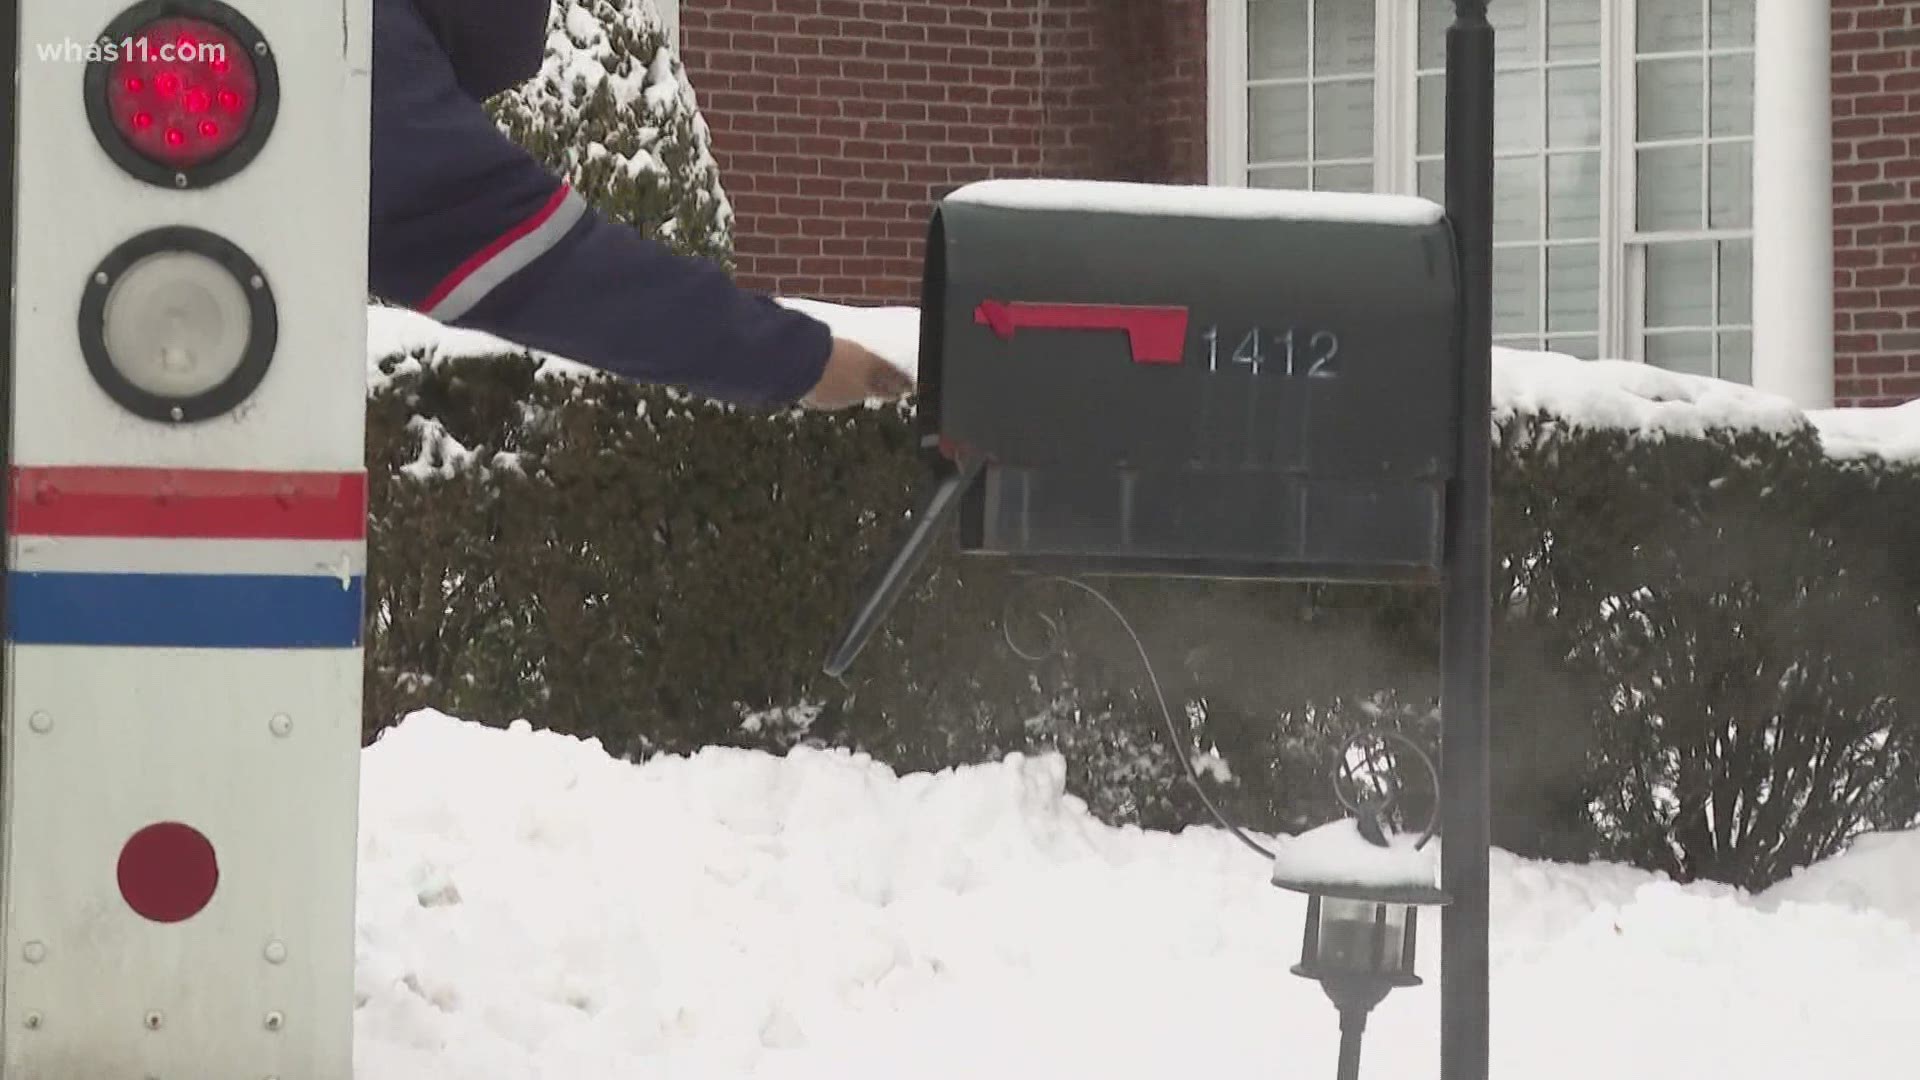 Complaints pile up as mail delivery falls behind due to winter weather.